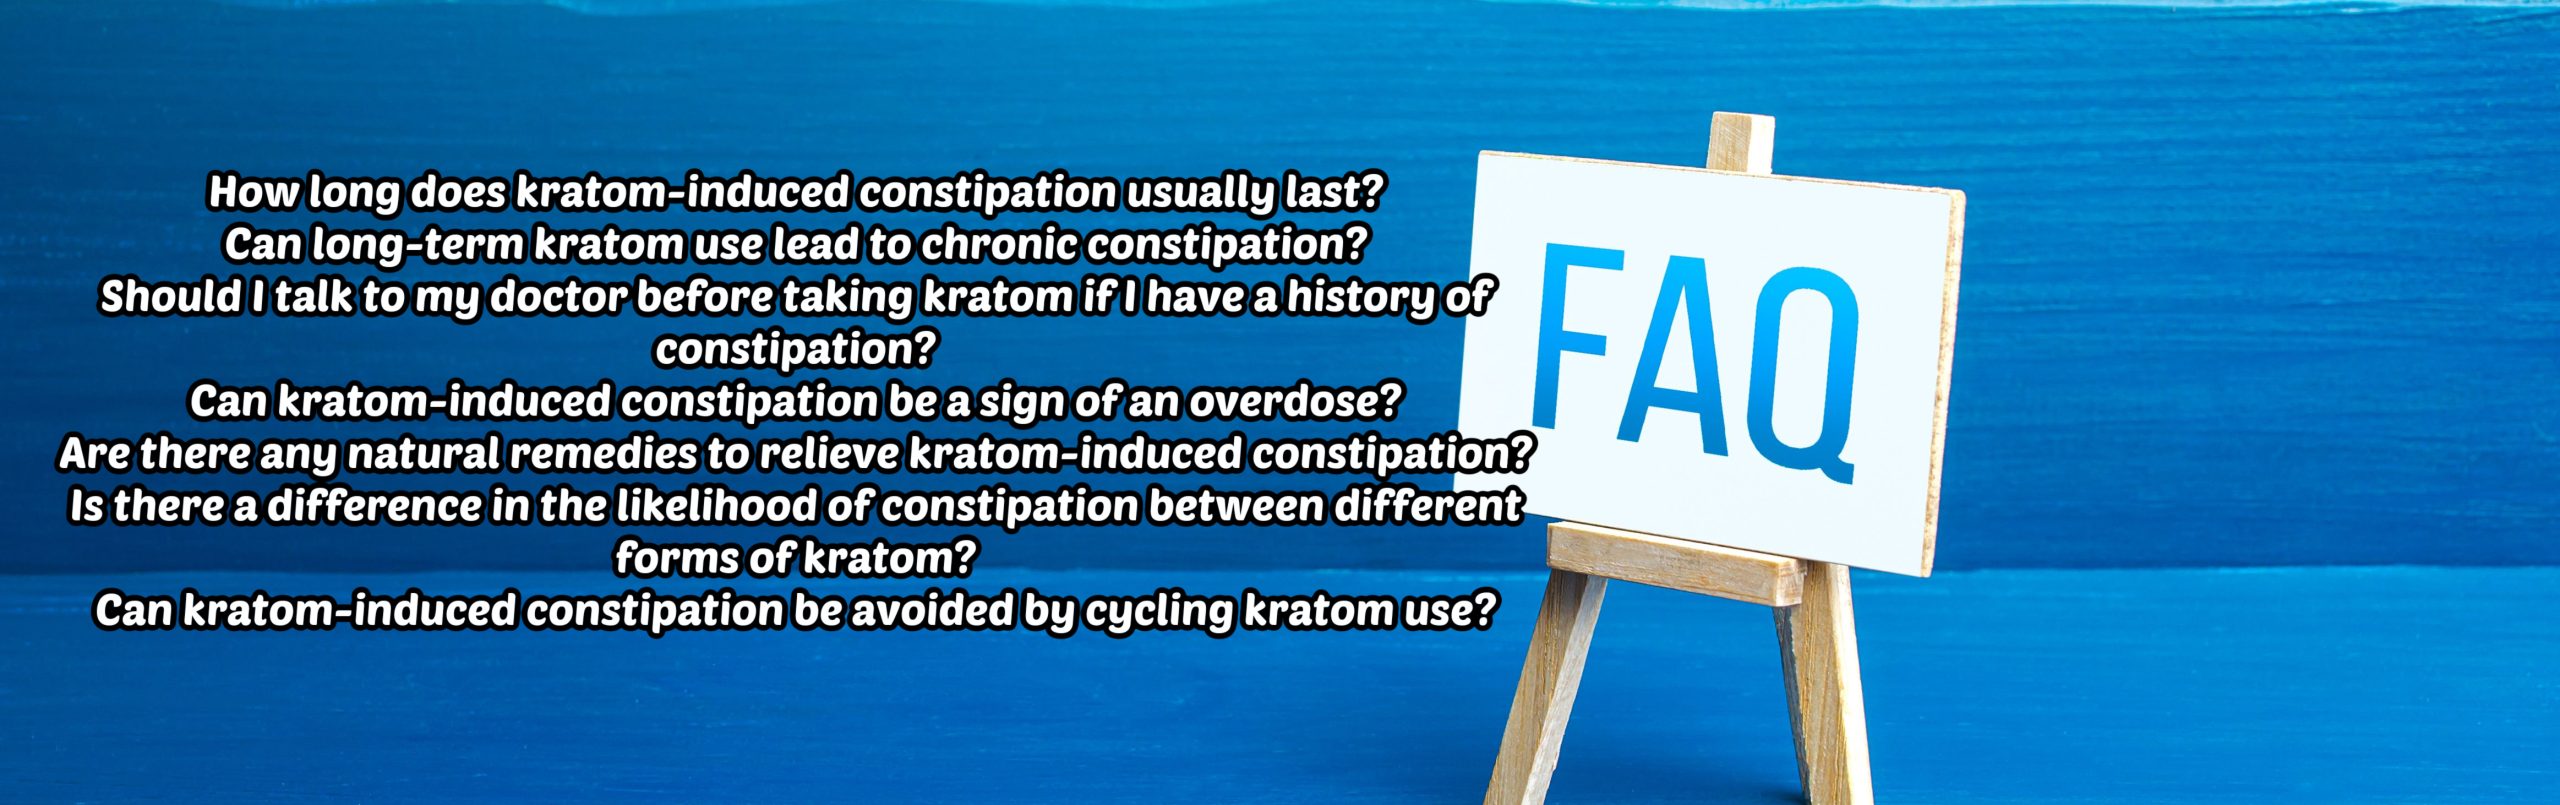 image of frequently asked questions about kratom constipation